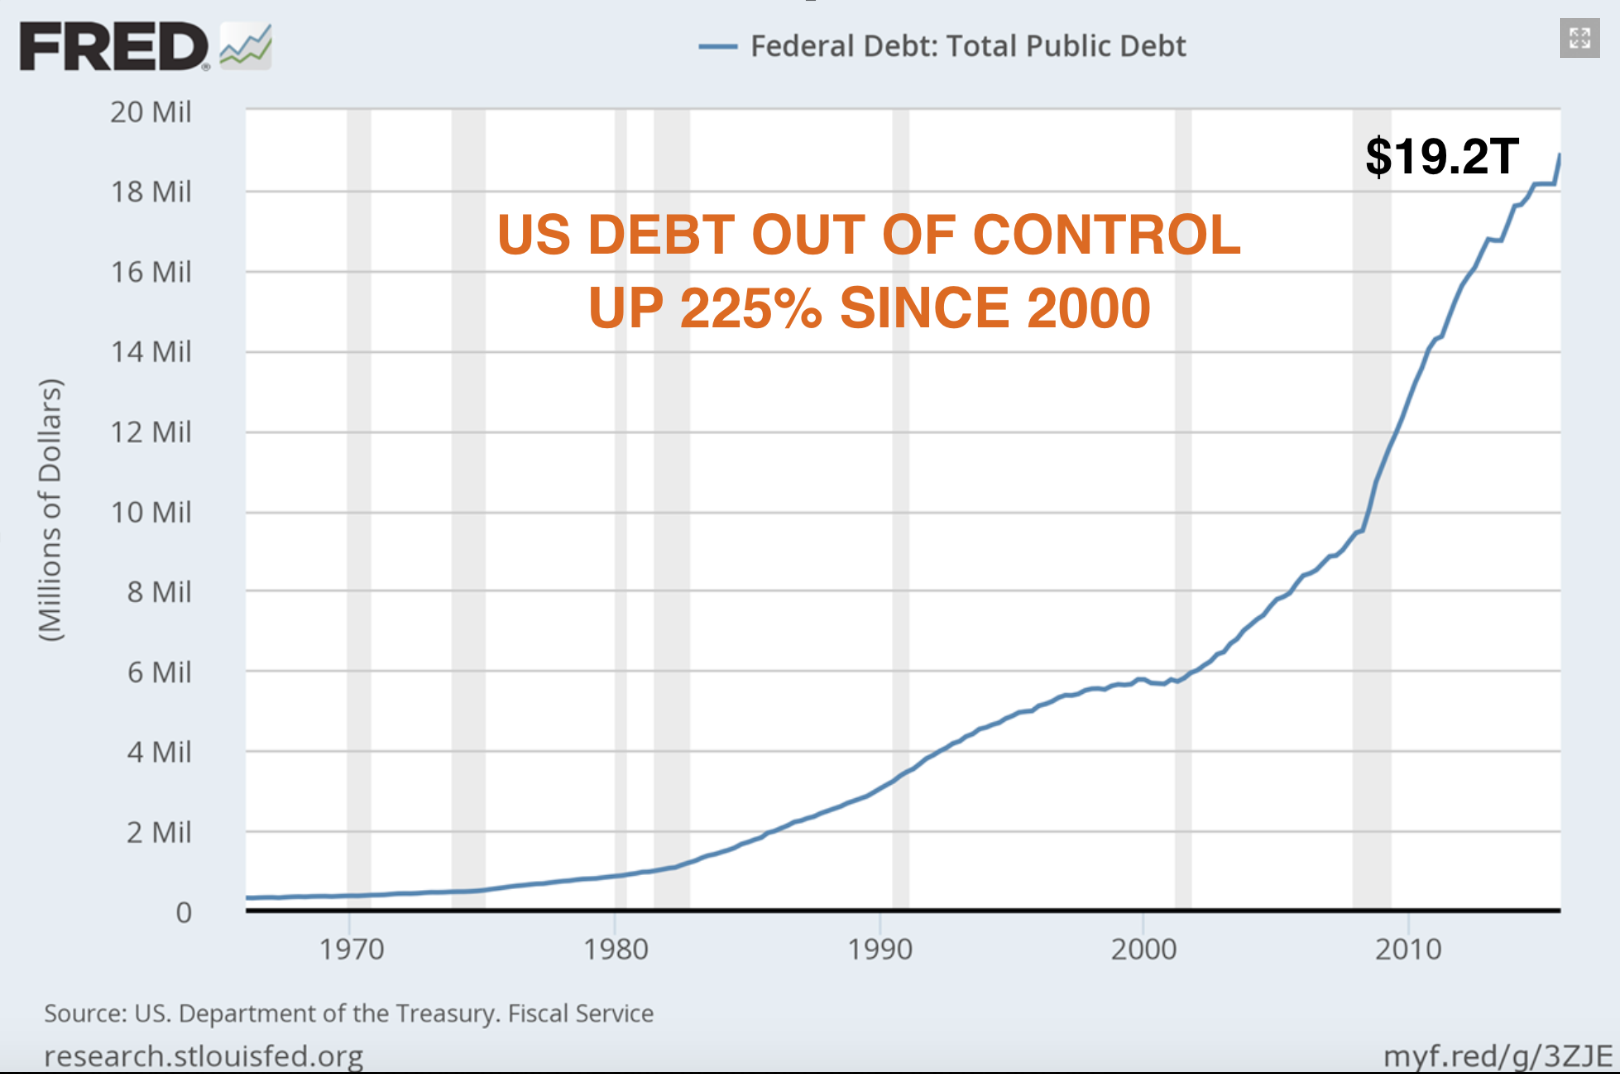 US Debt out of control